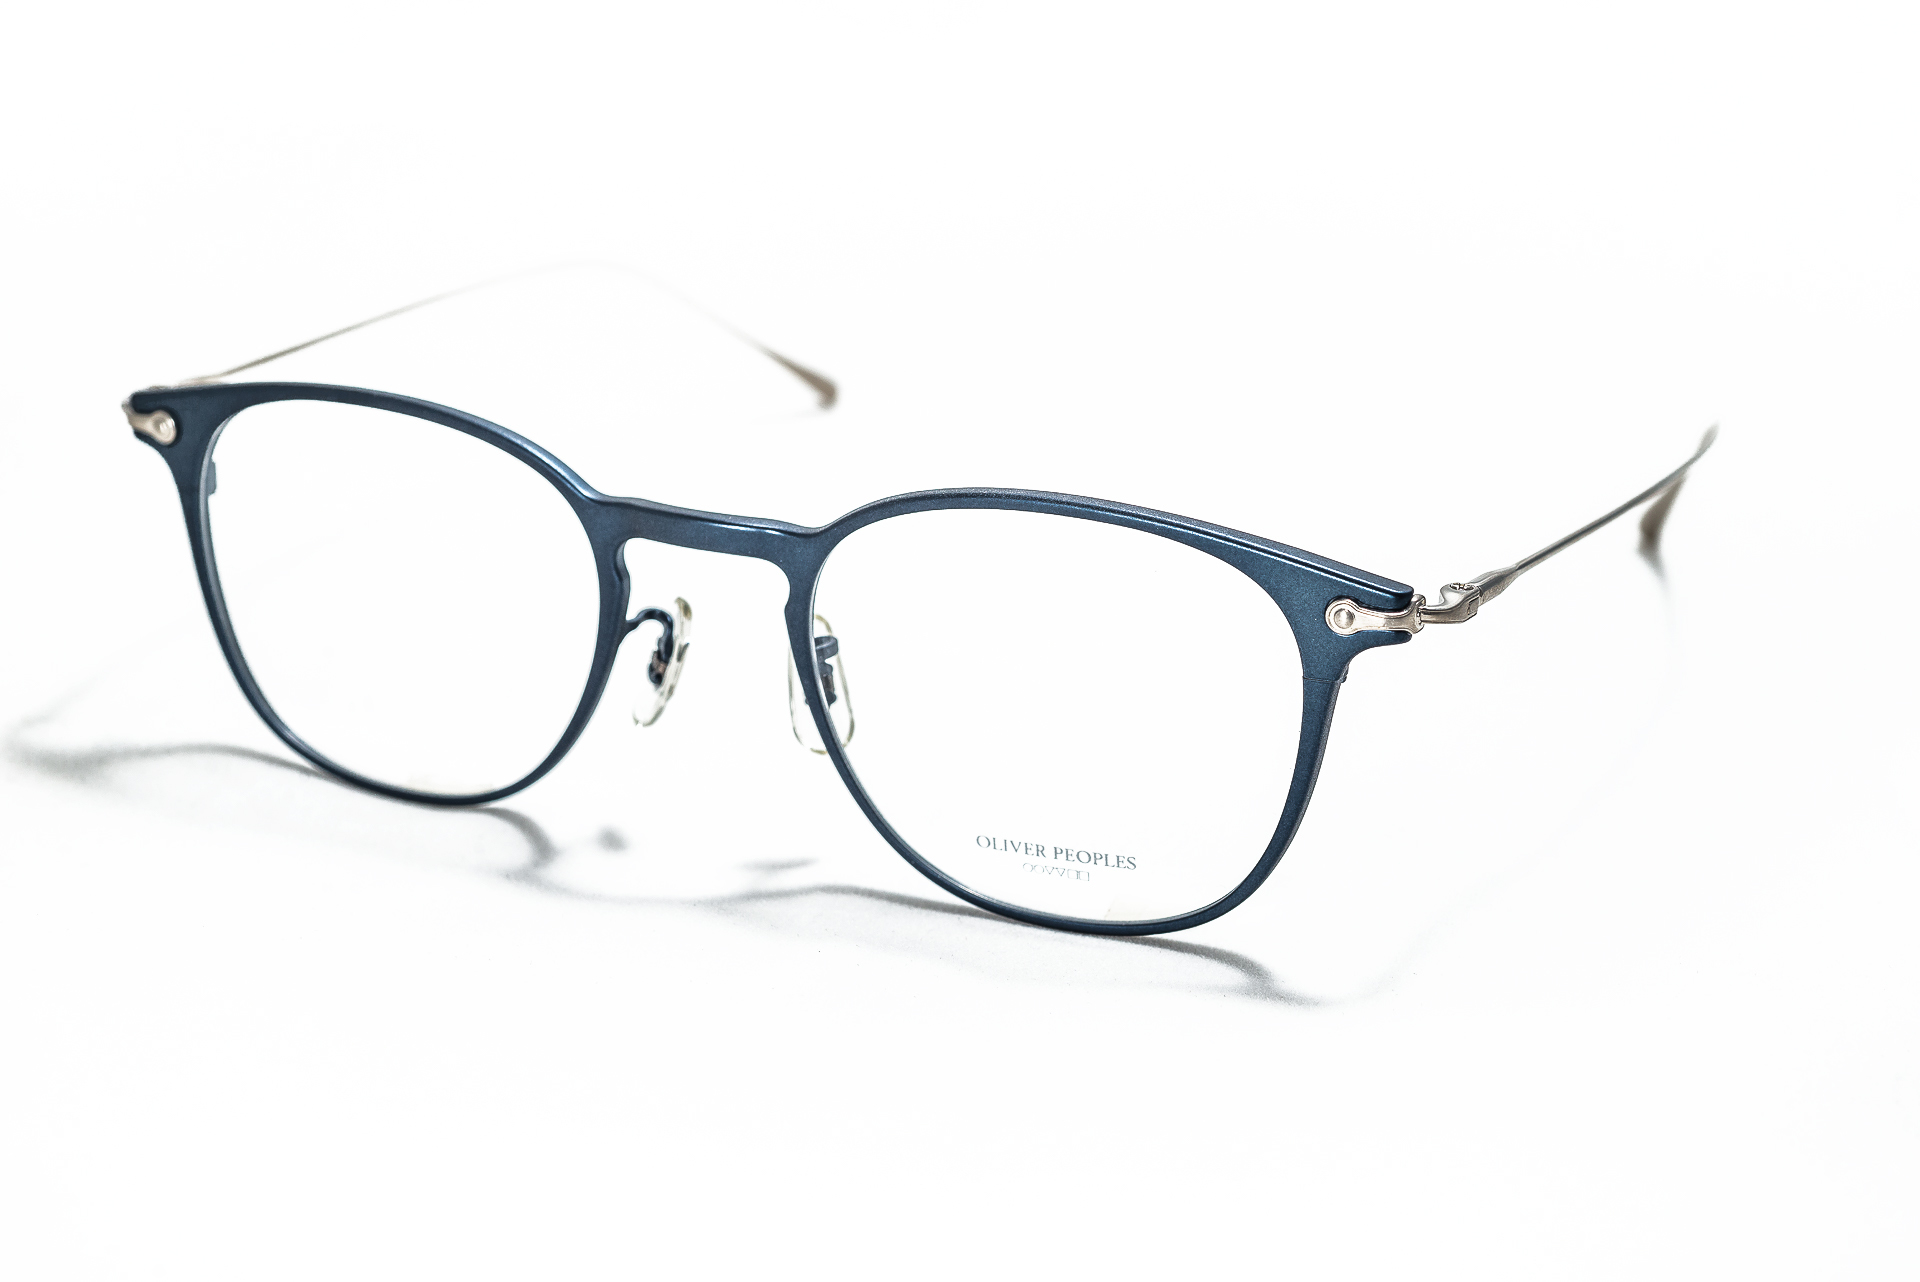 Carswell-NAVY- The New Black Optical